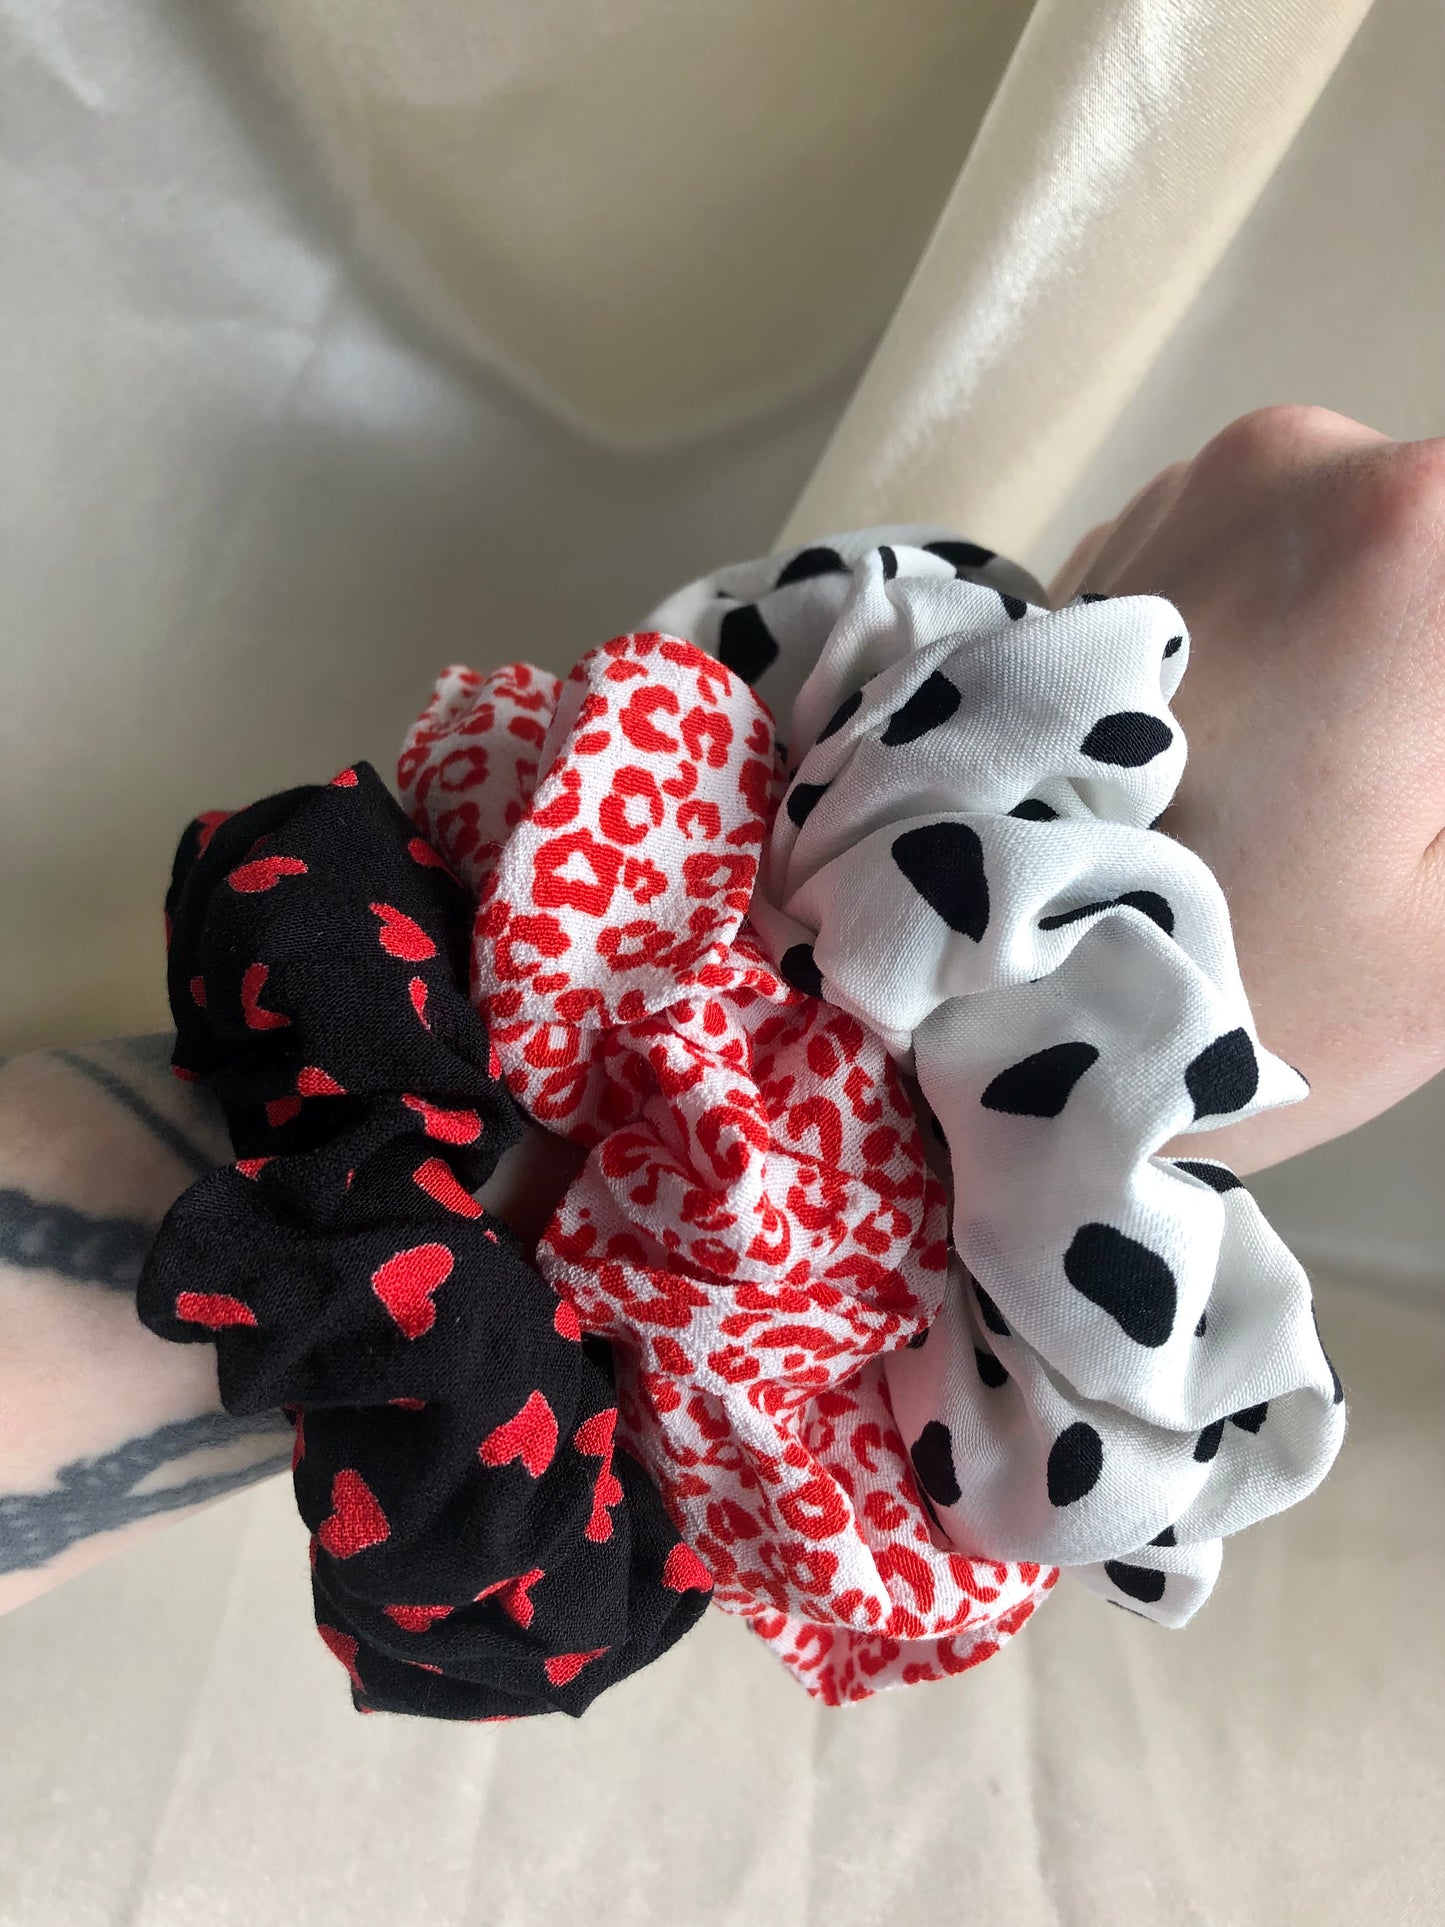 Black with Red Heart Print Hair Band - choose style